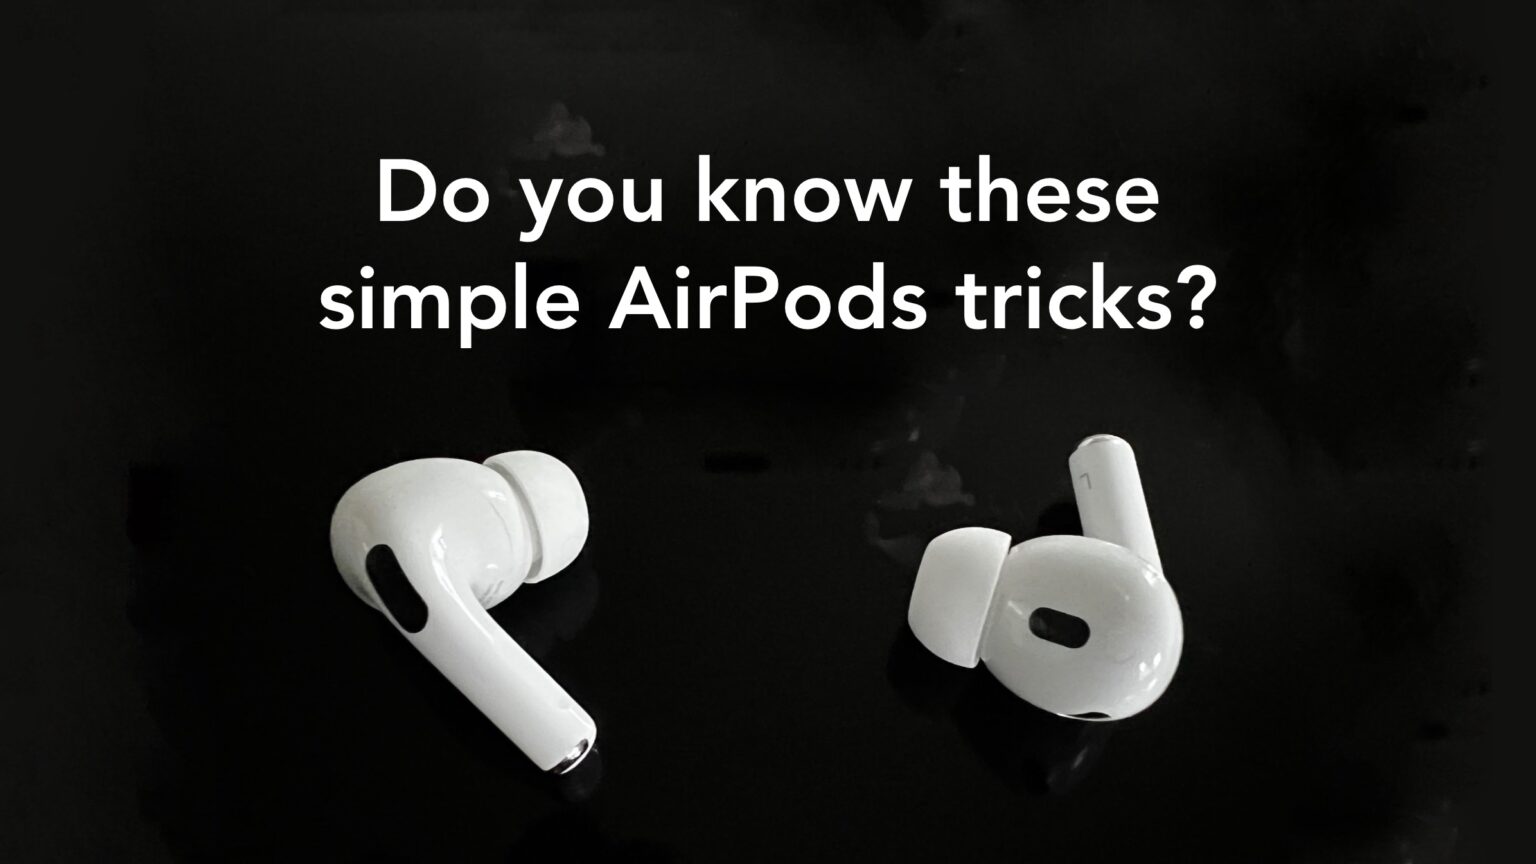 3 more simple AirPods tricks everyone should know